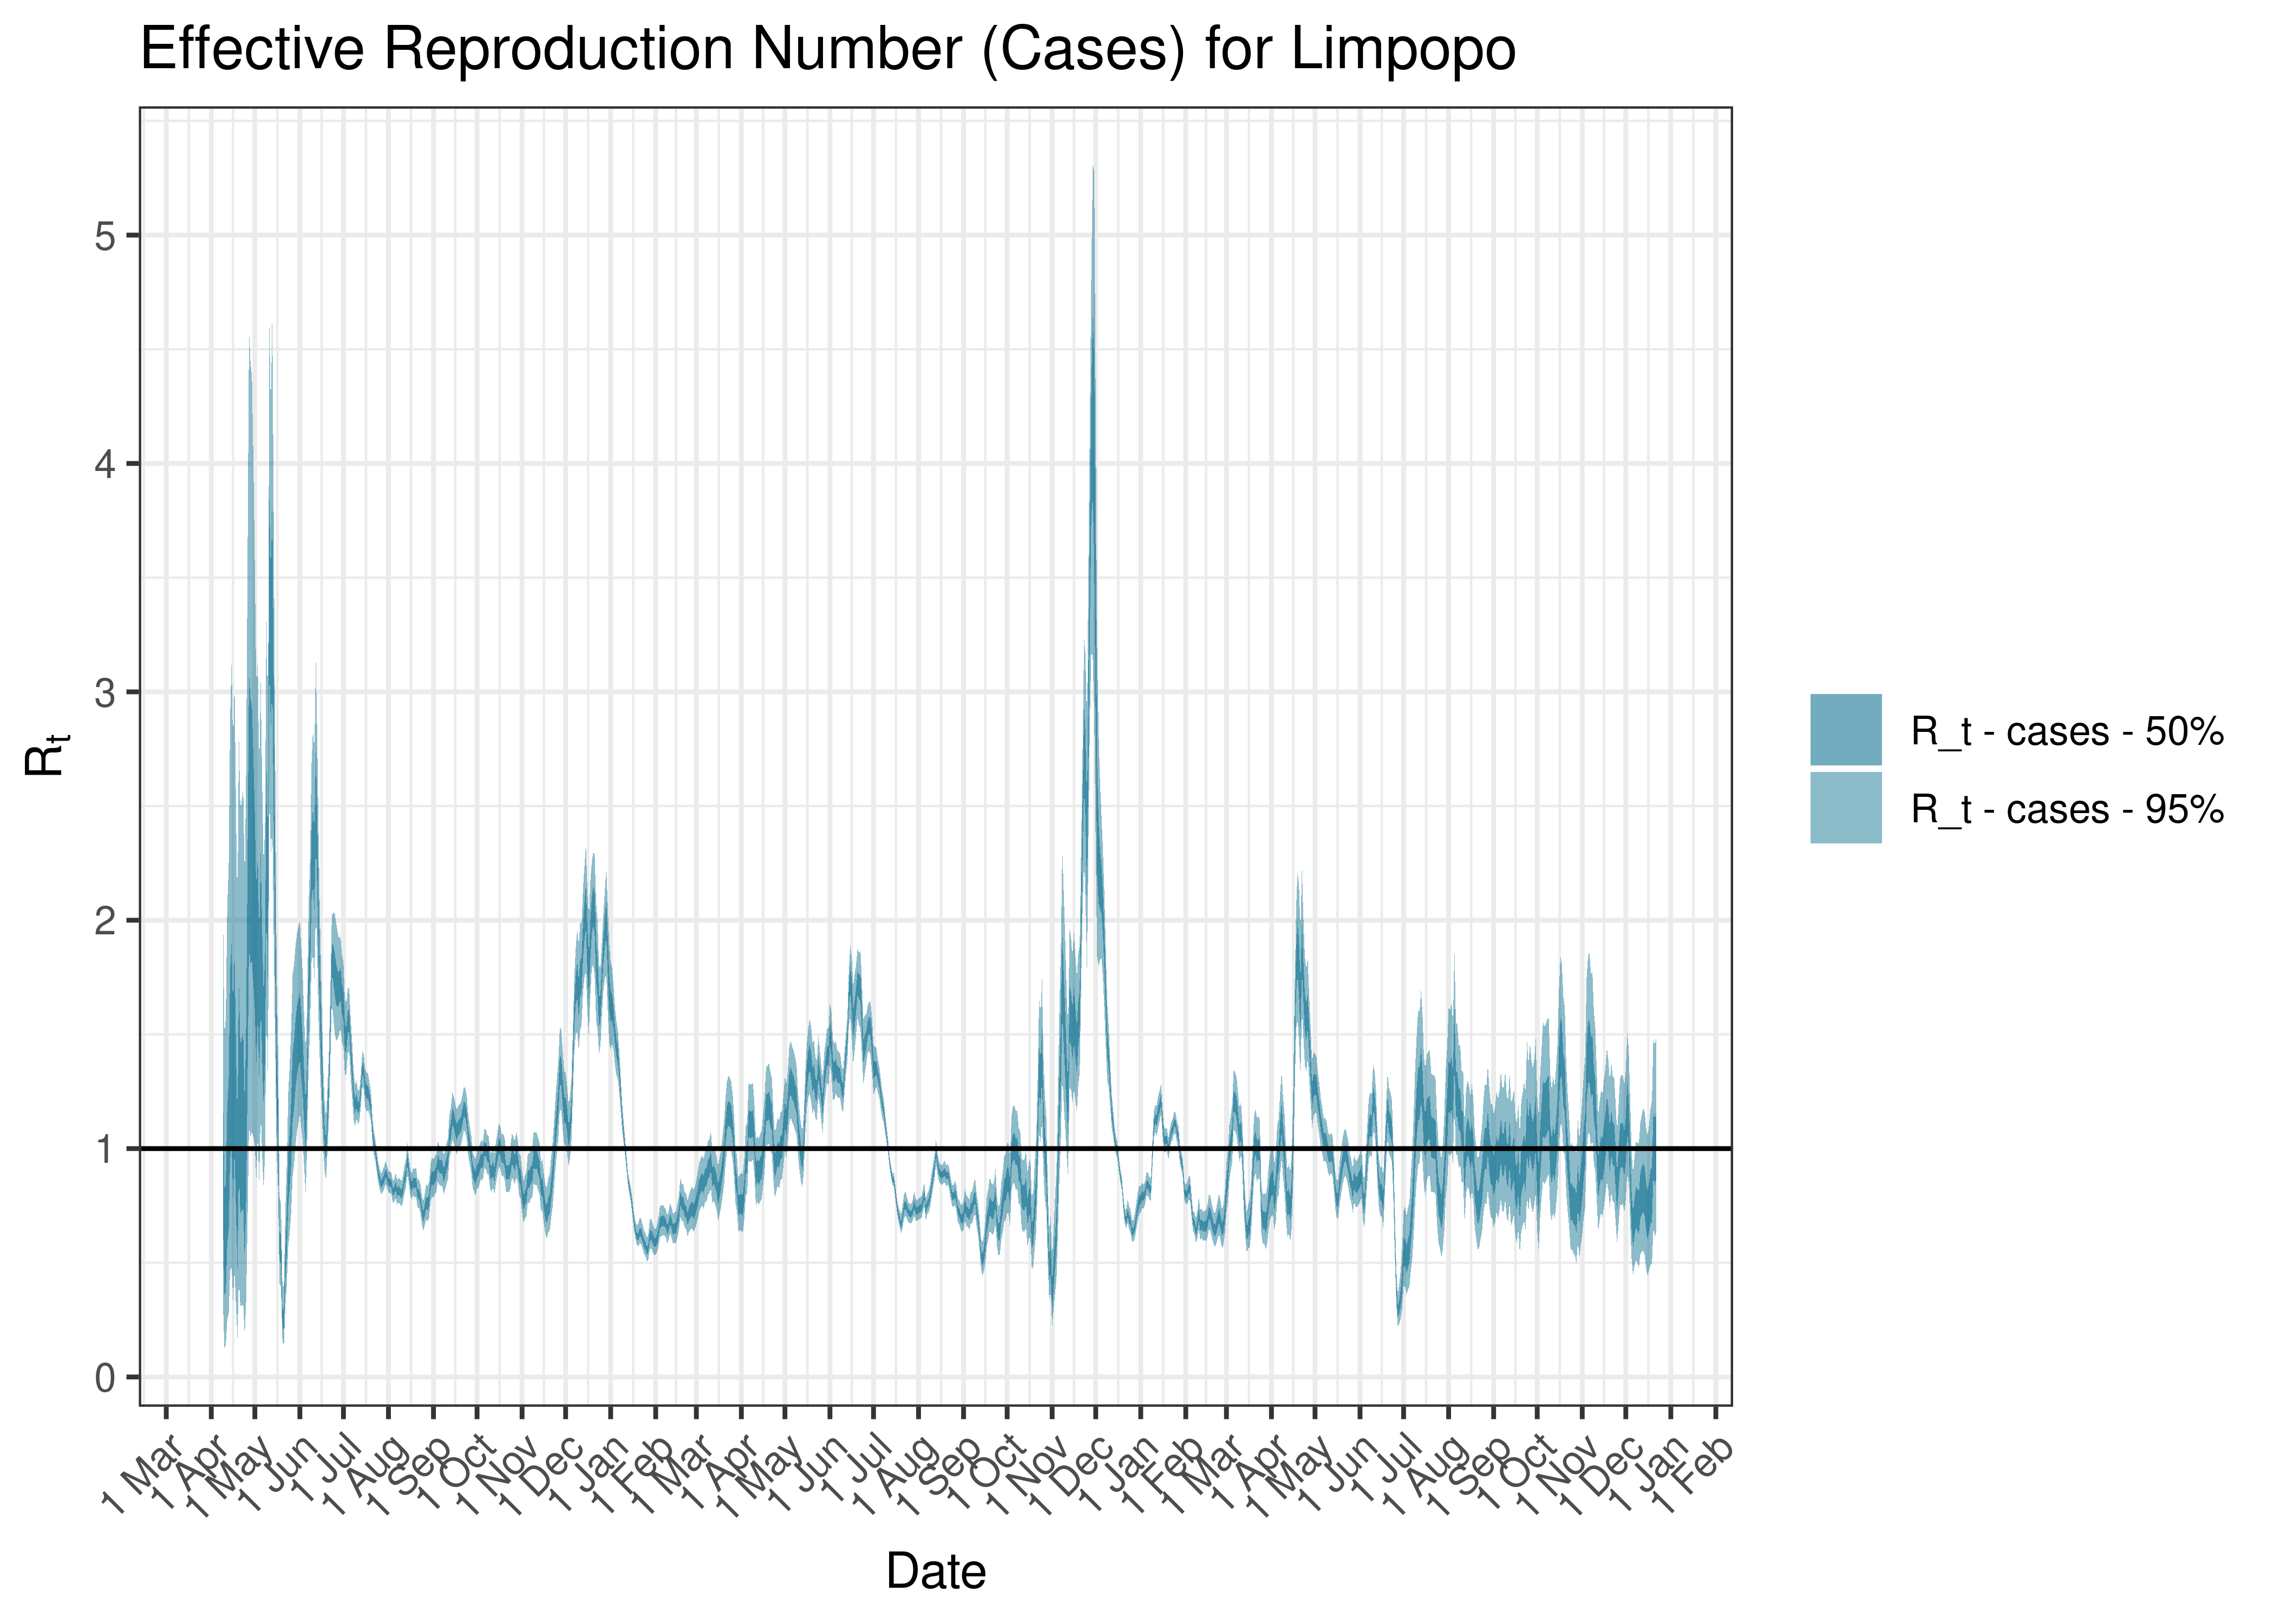 Estimated Effective Reproduction Number Based on Cases for Limpopo since 1 April 2020